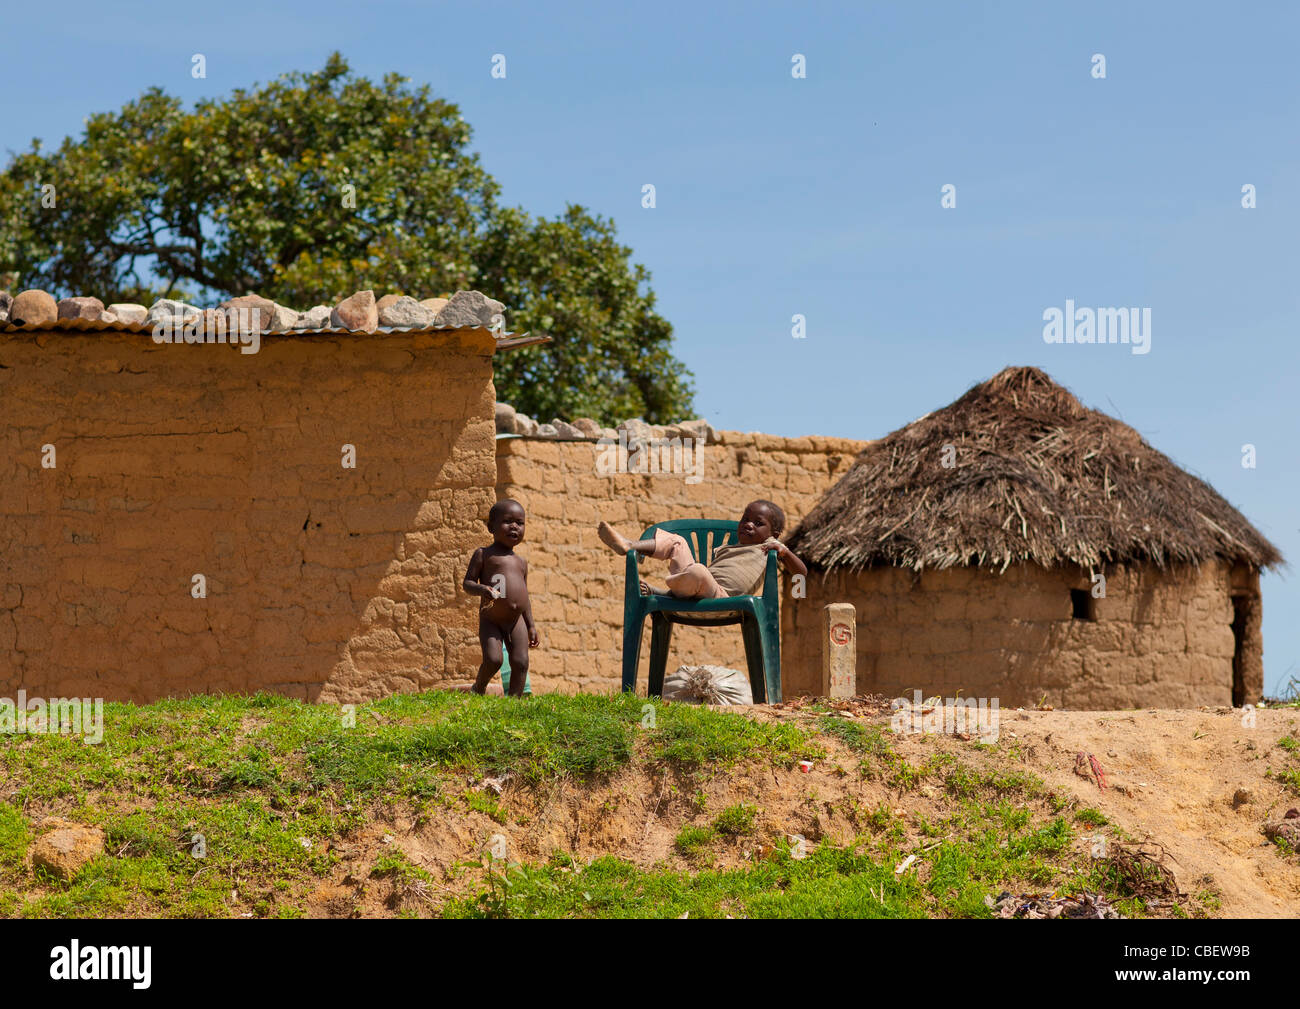 Kids Playing In Front Of Huts In Lubango, Angola Stock Photo